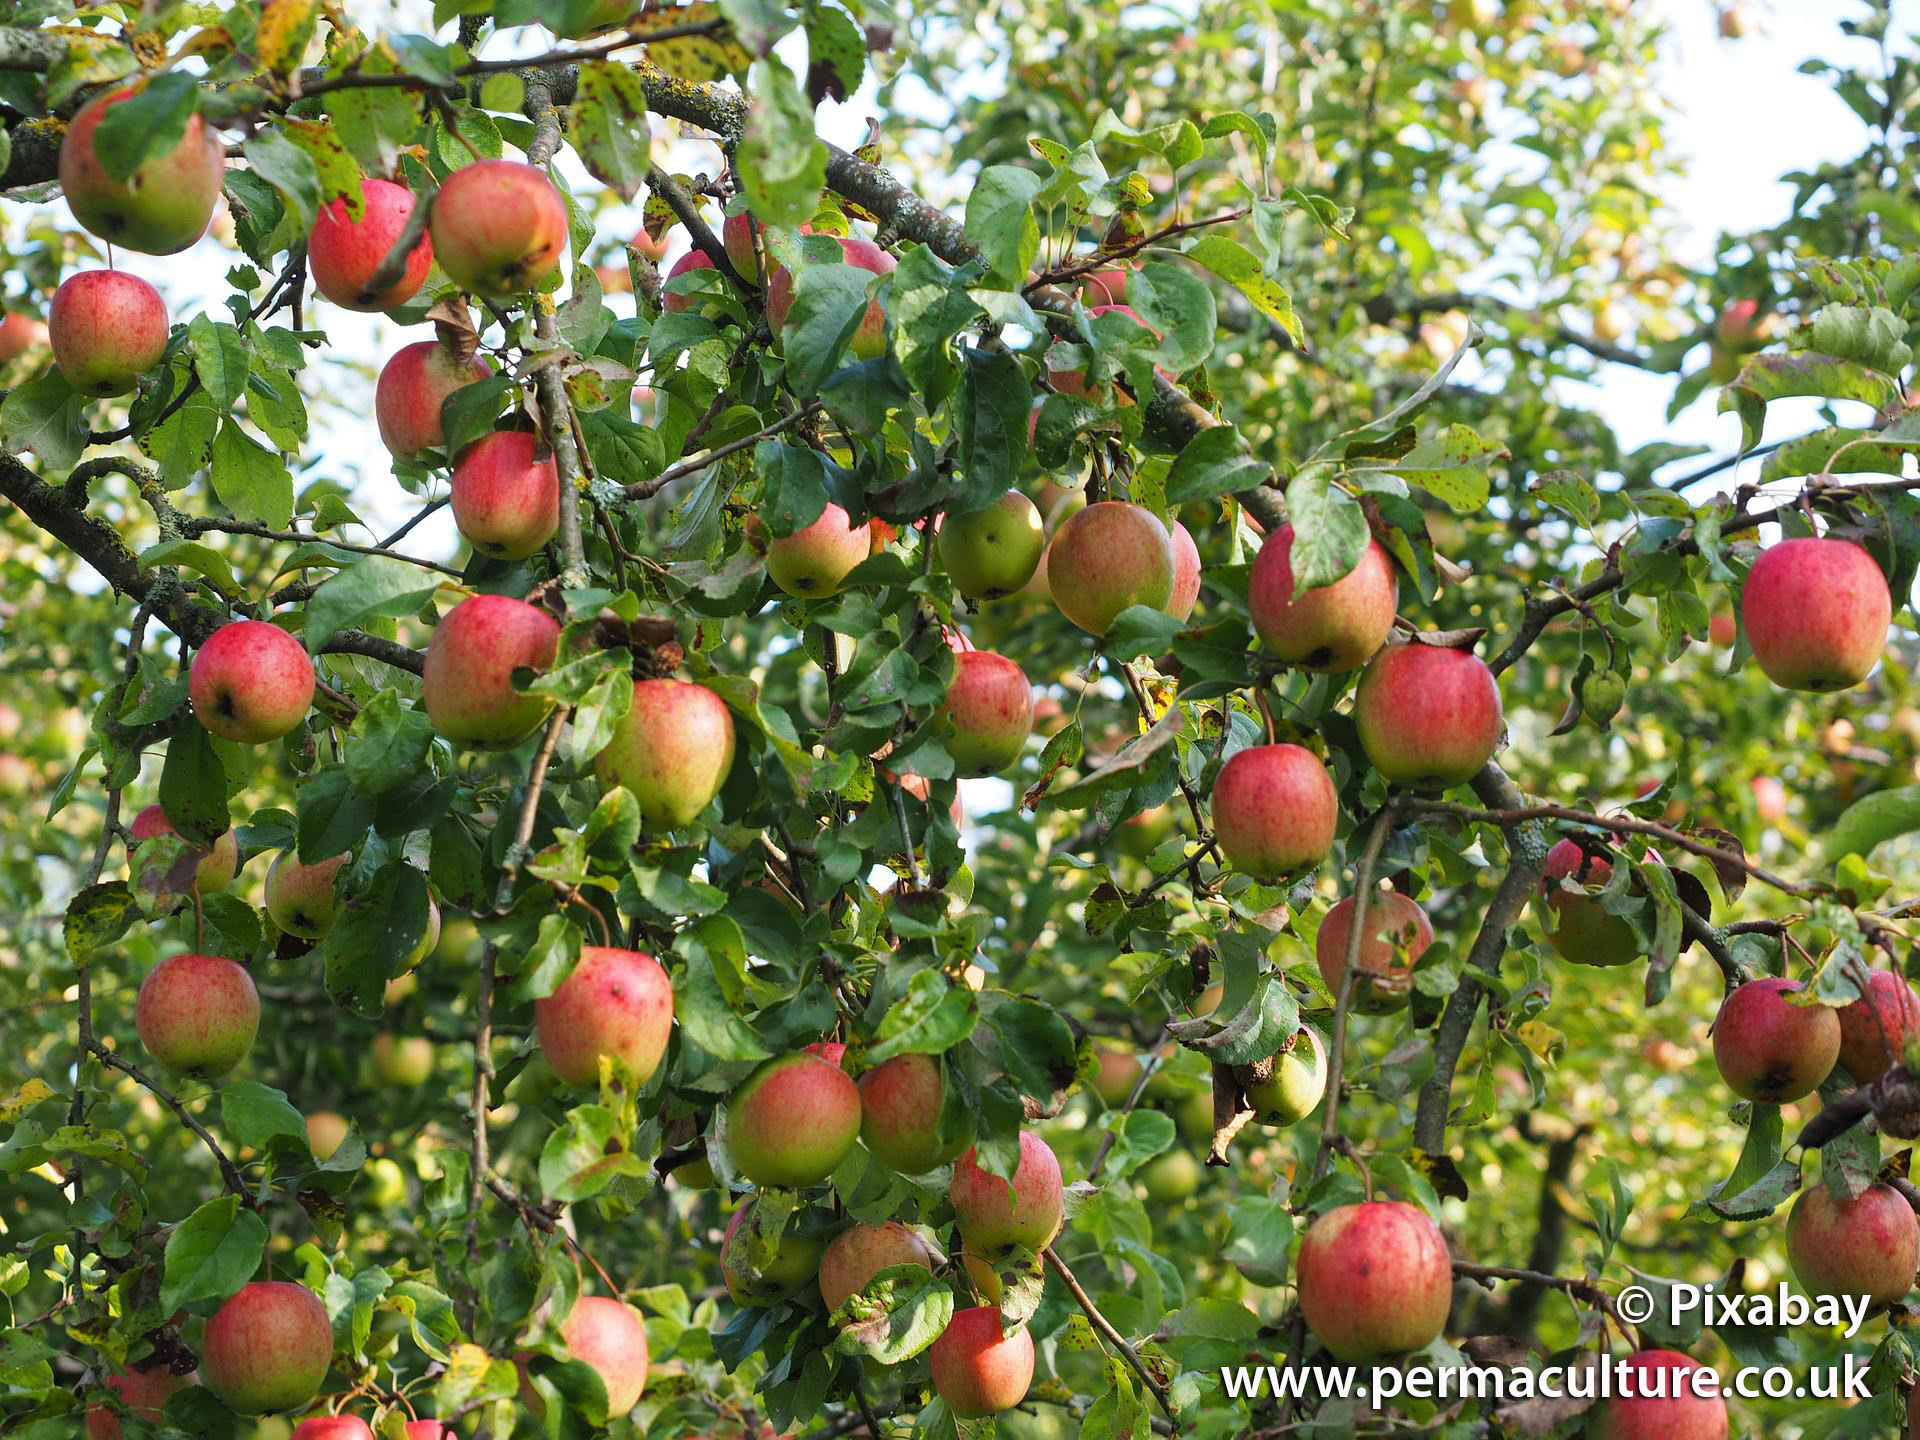 Planting Fruit Trees – Part 2 – Which Variety?